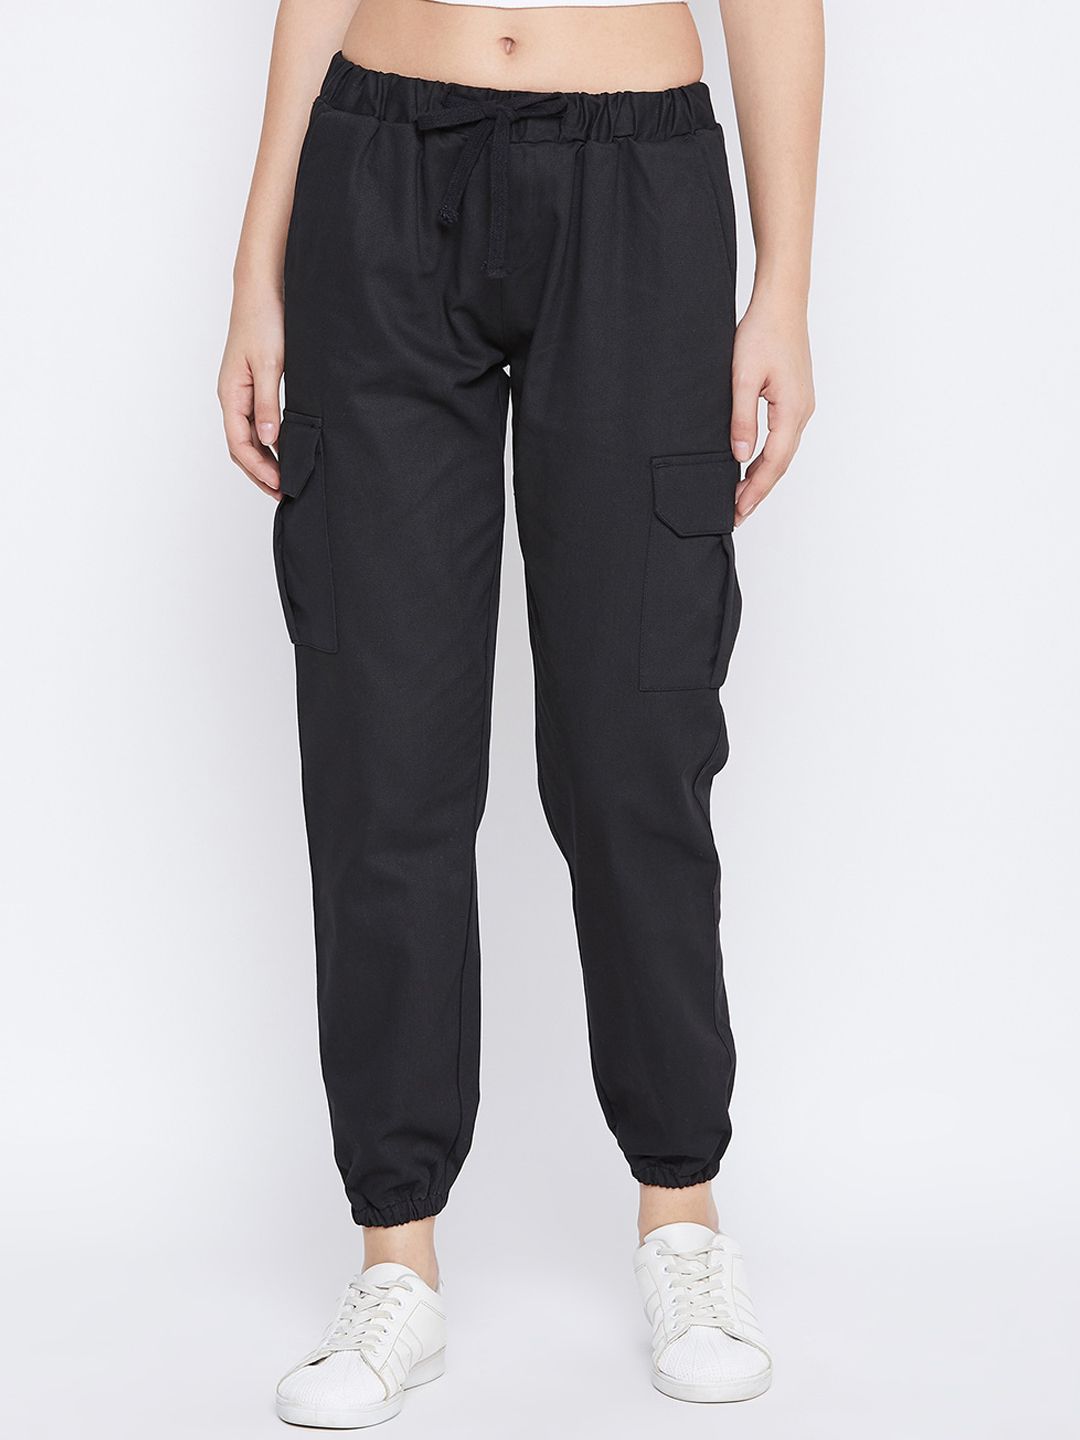 Q-rious Women Black Regular Fit Joggers Trousers Price in India